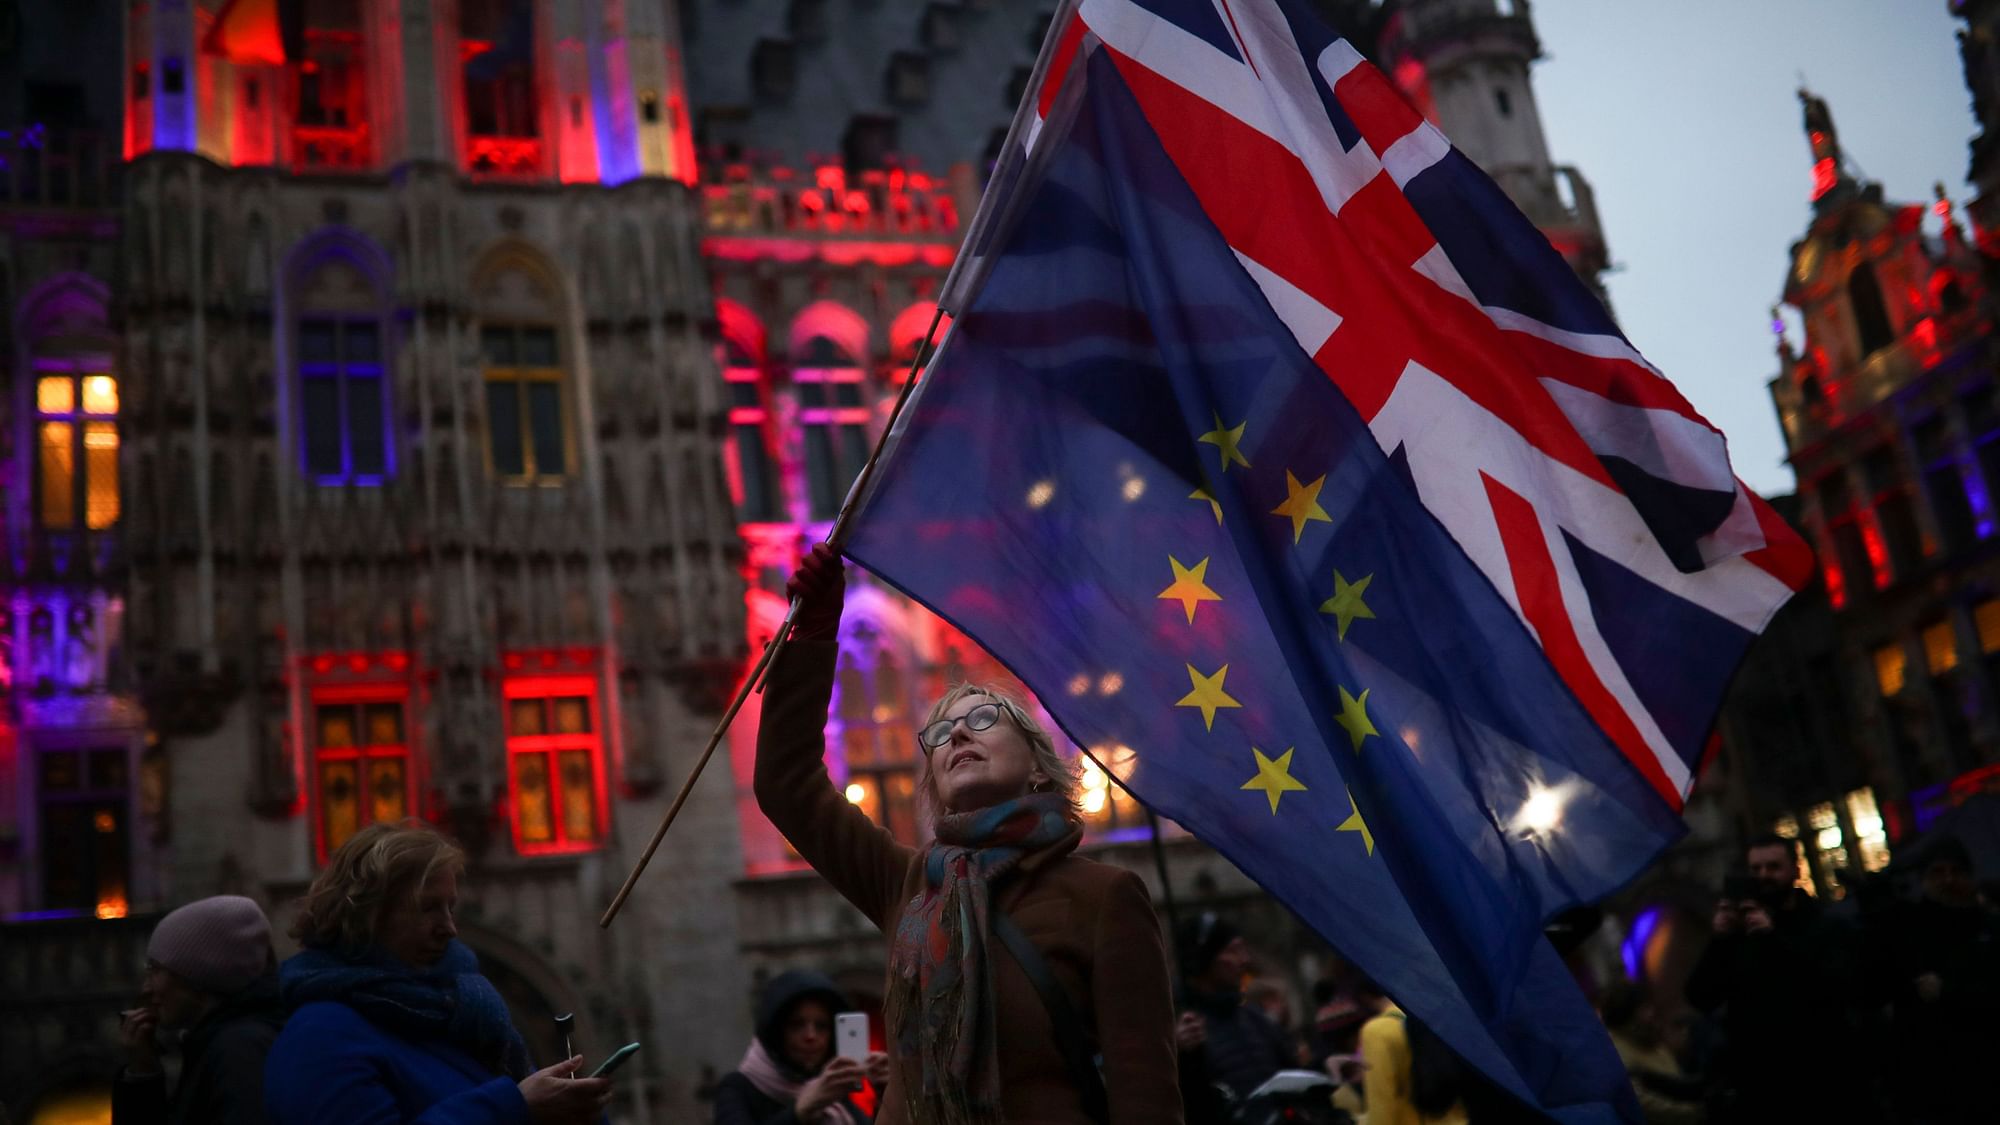 A woman holds up the Union and the European Union flags during an event called “Brussels calling” to celebrate the friendship between Belgium and Britain at the Grand Place in Brussels, on Thursday, January 30.